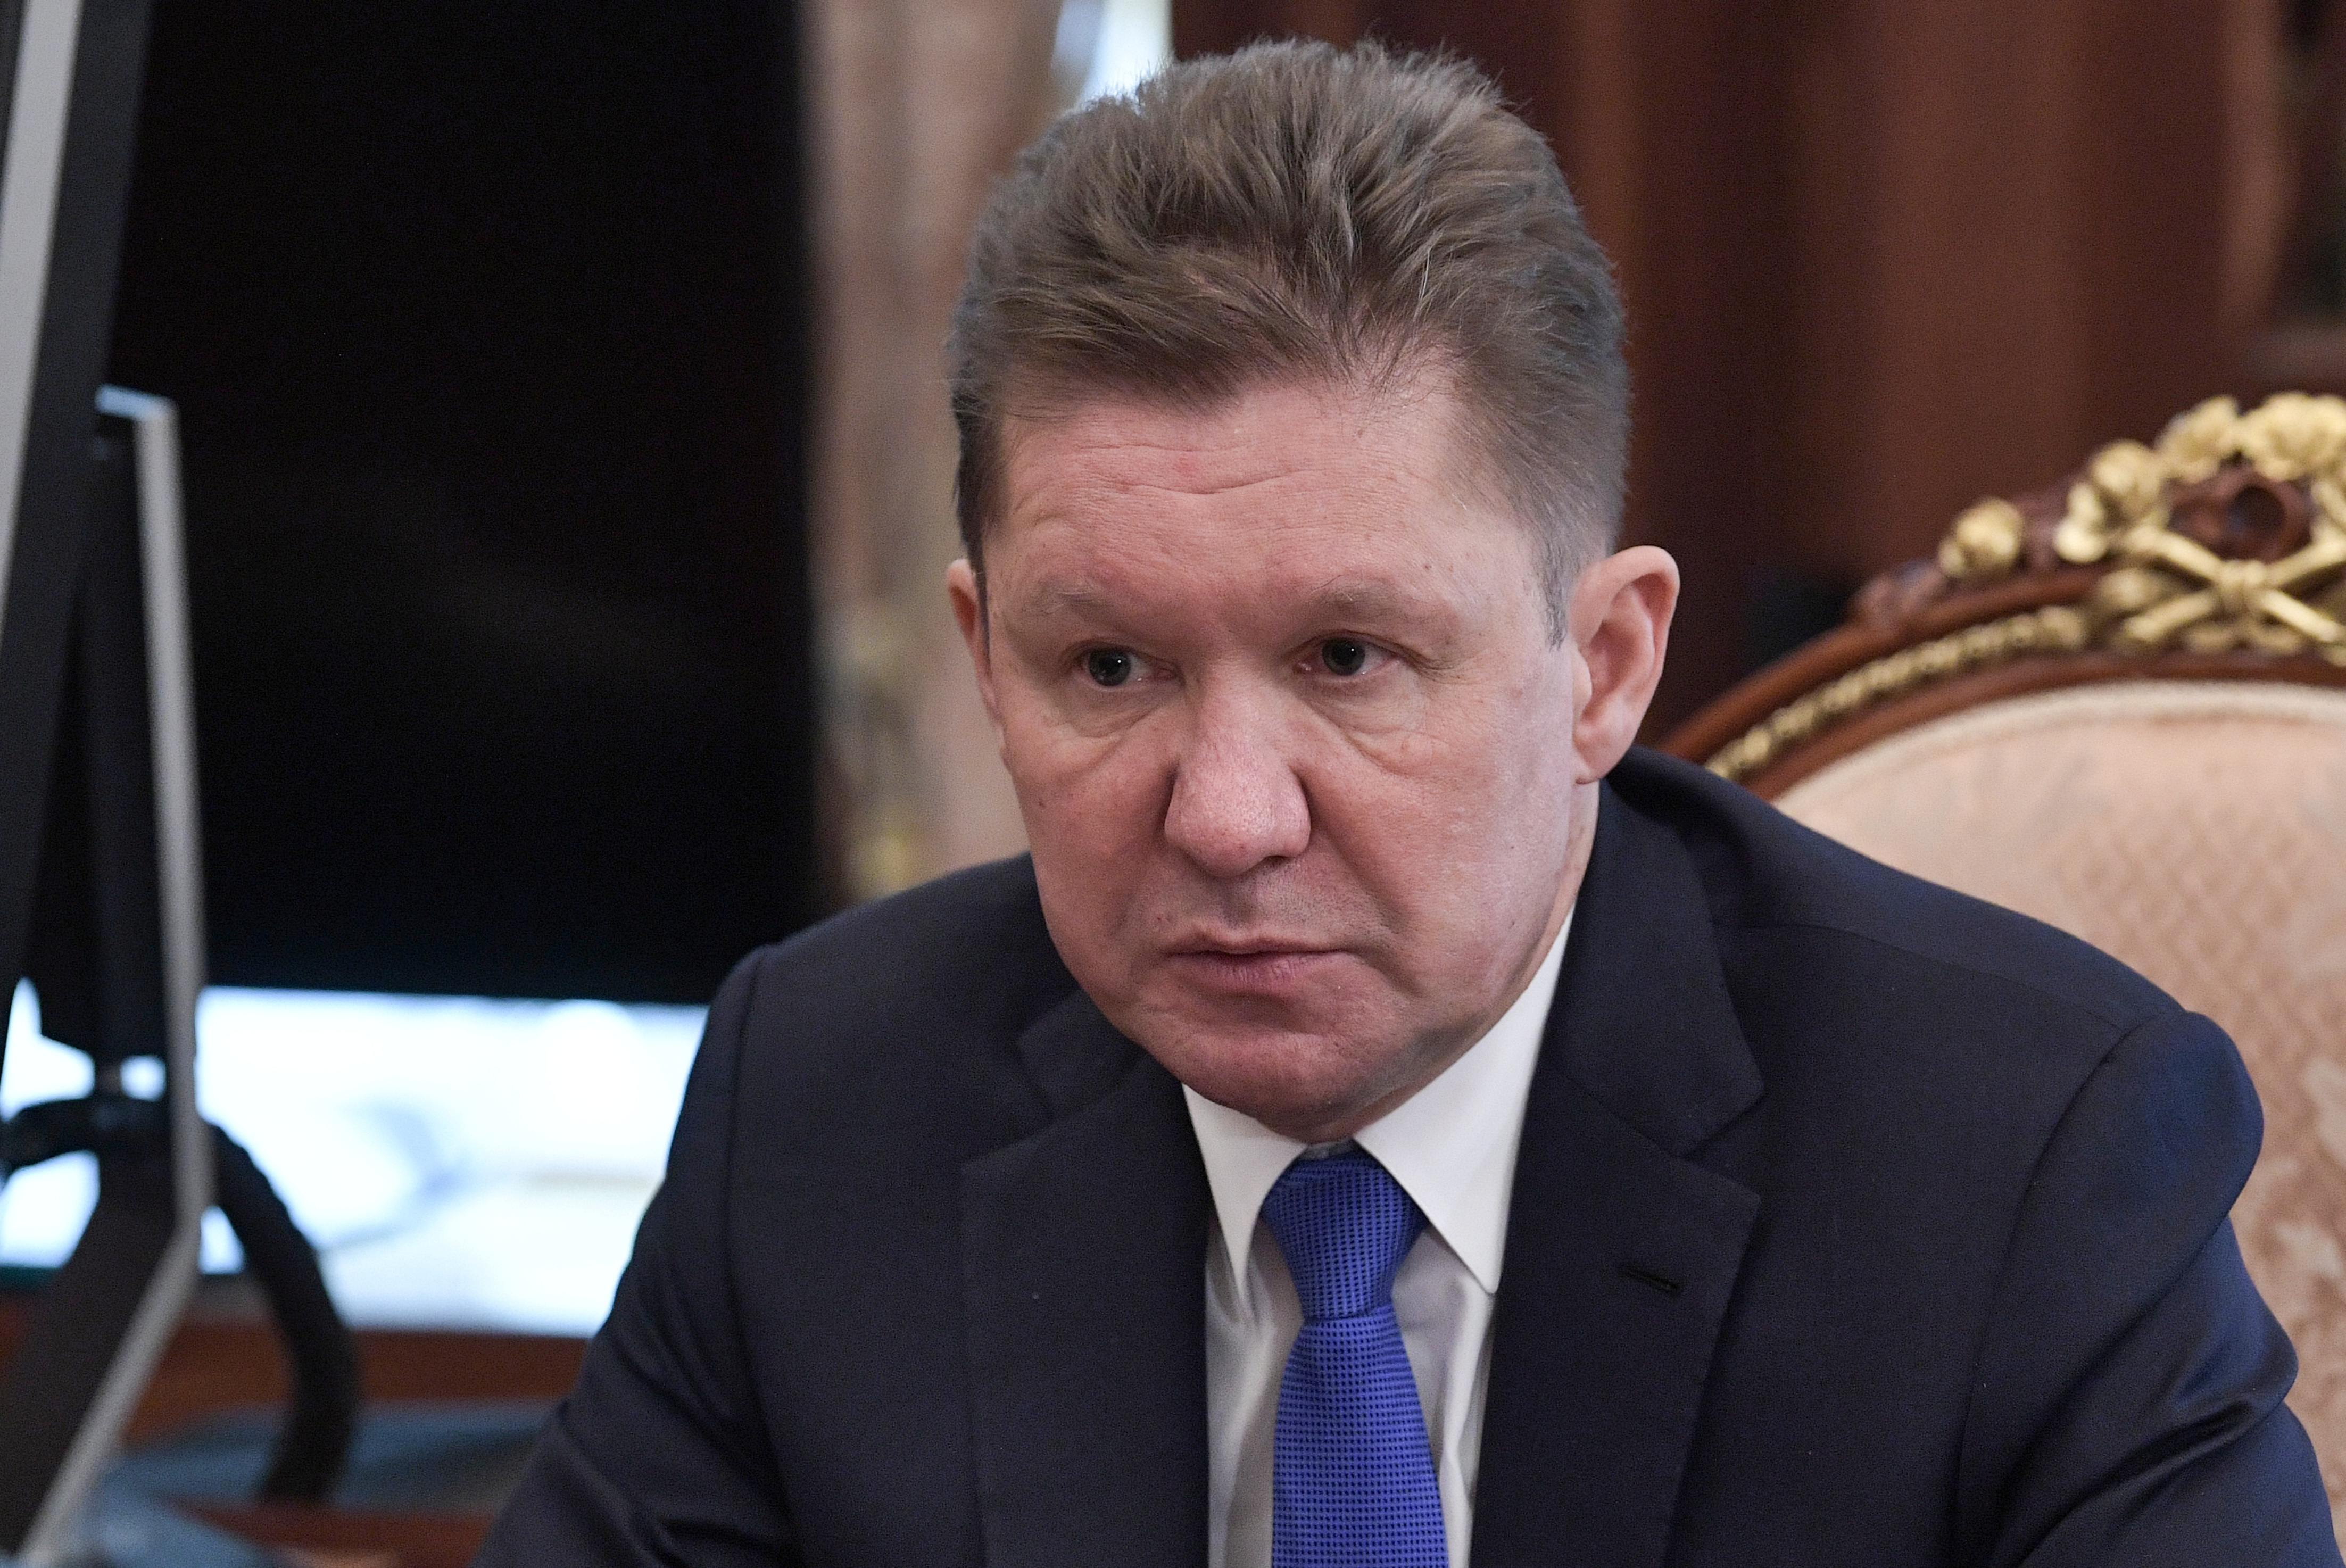 Gazprom Chief Executive Miller attends a meeting with Russian President Putin in Moscow